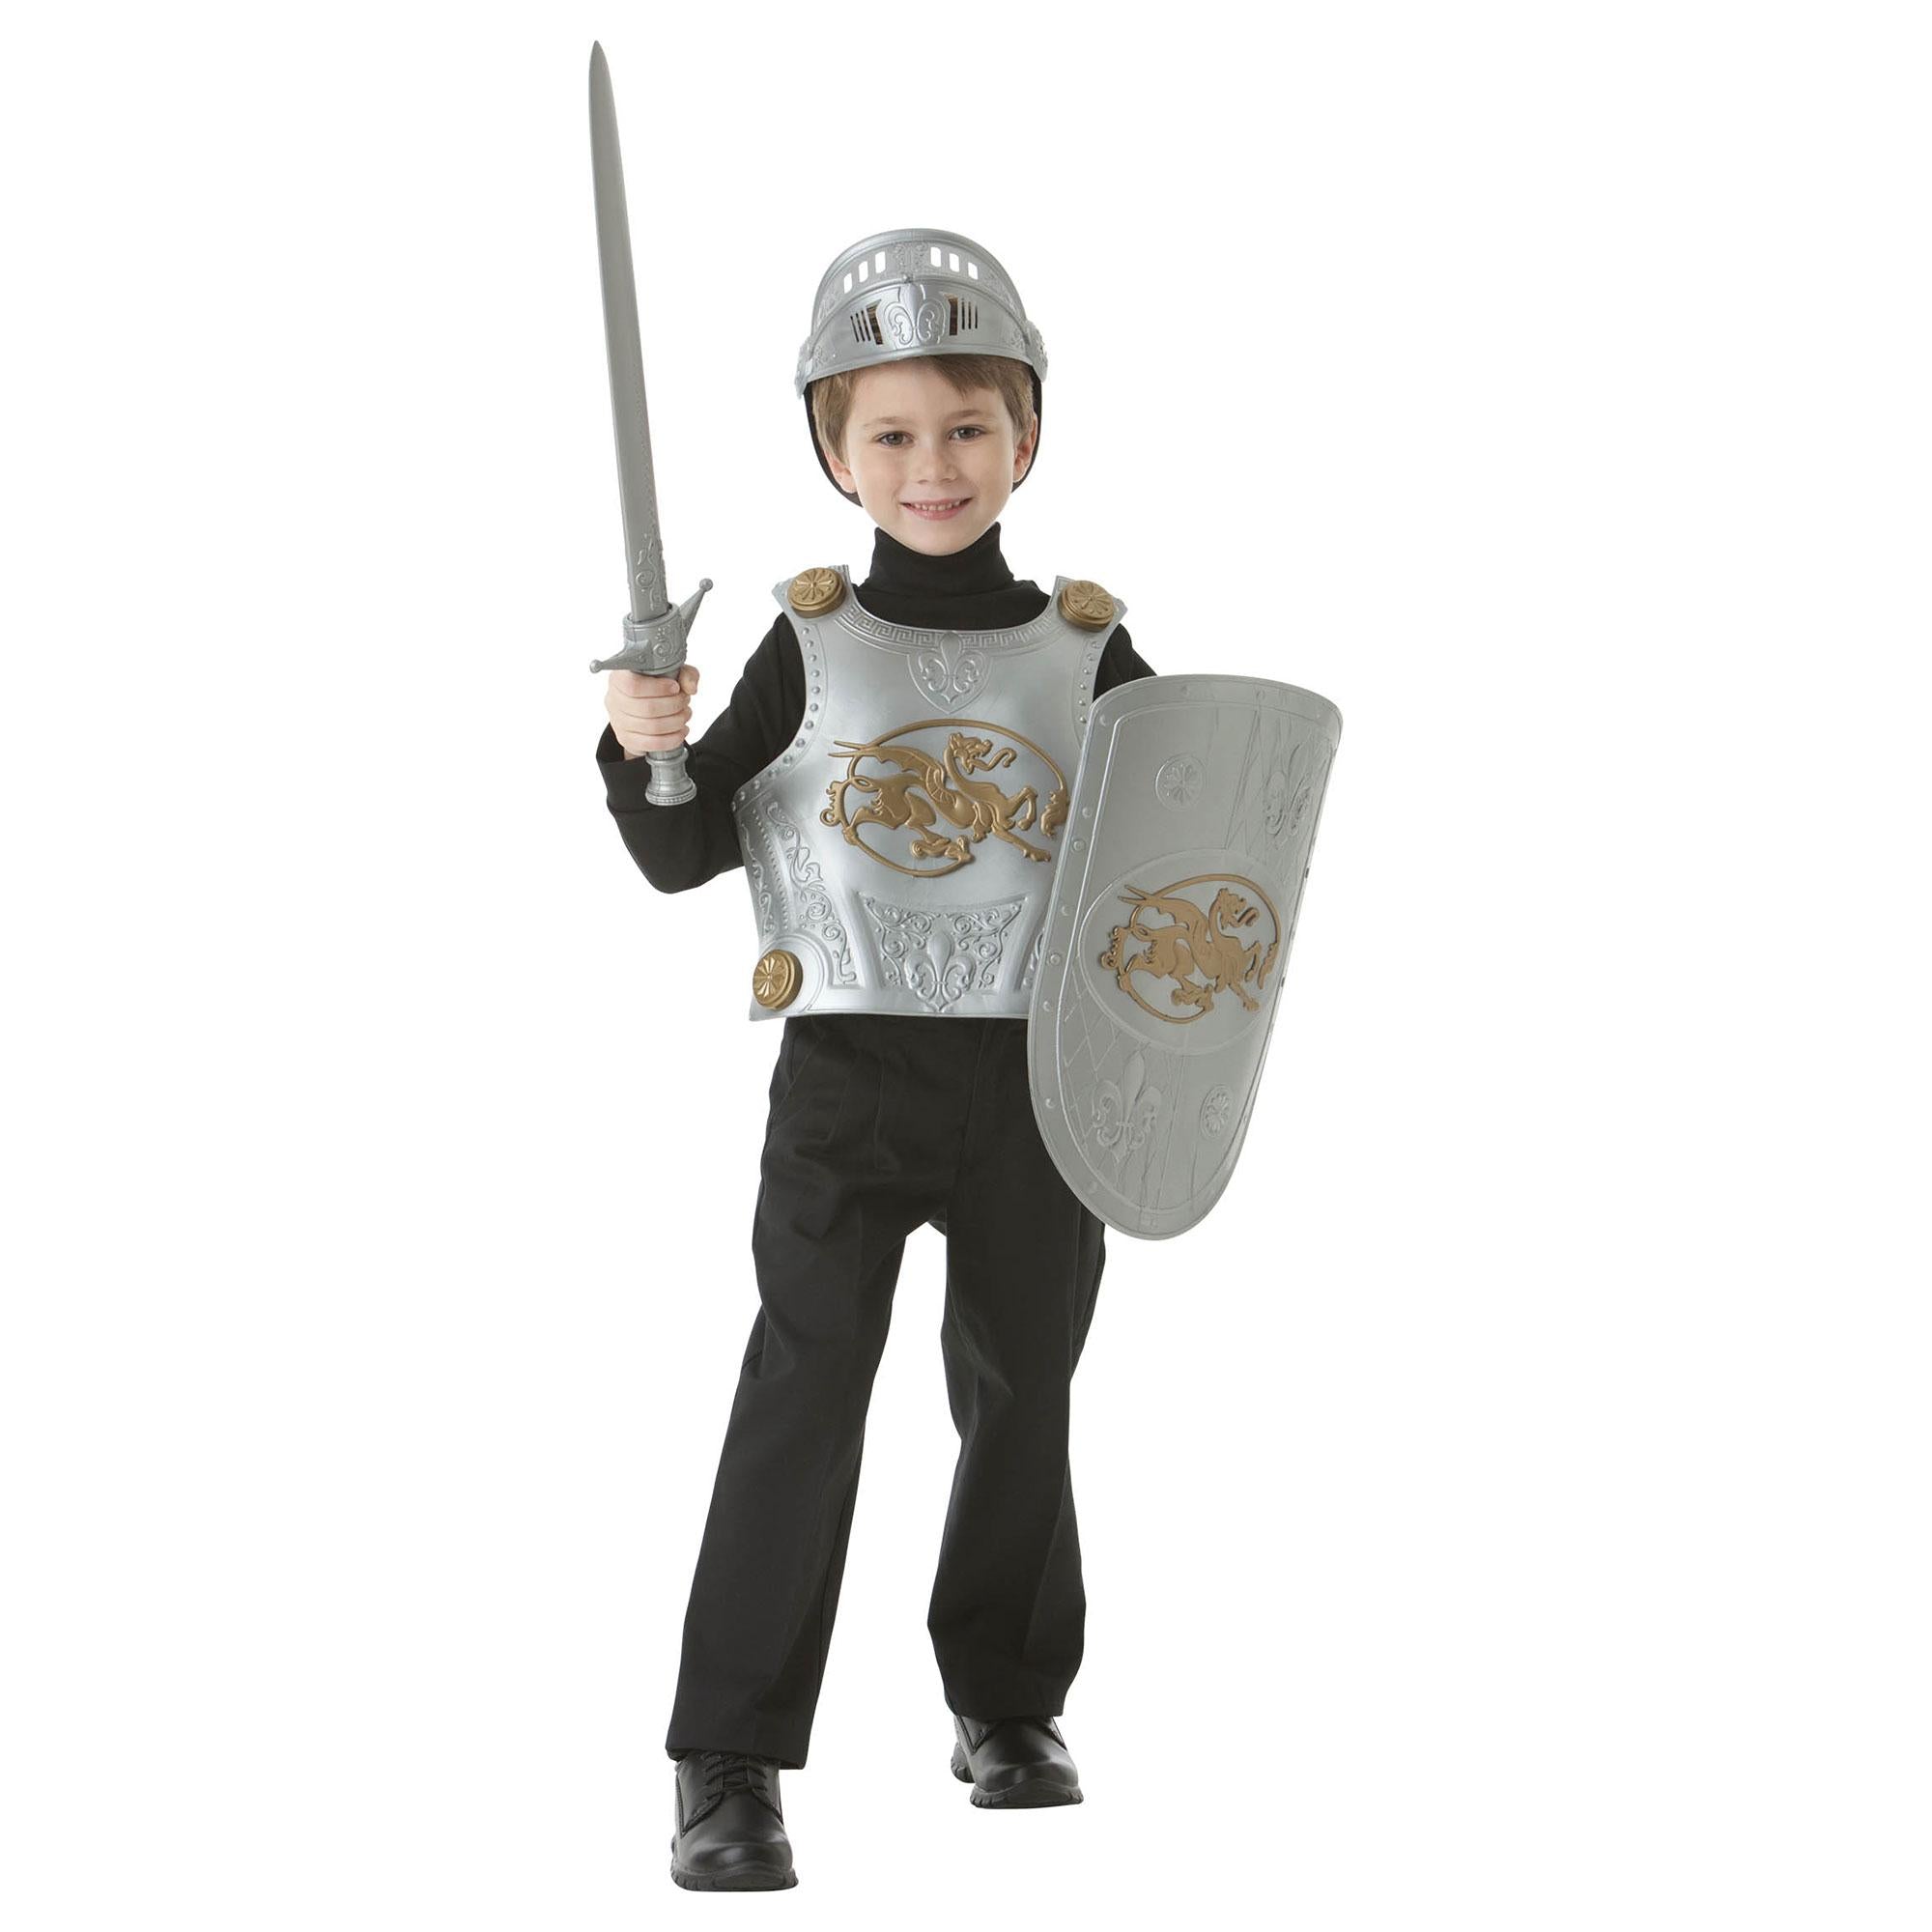 Crusader Play Set Costumes & Apparel - Party Centre - Party Centre